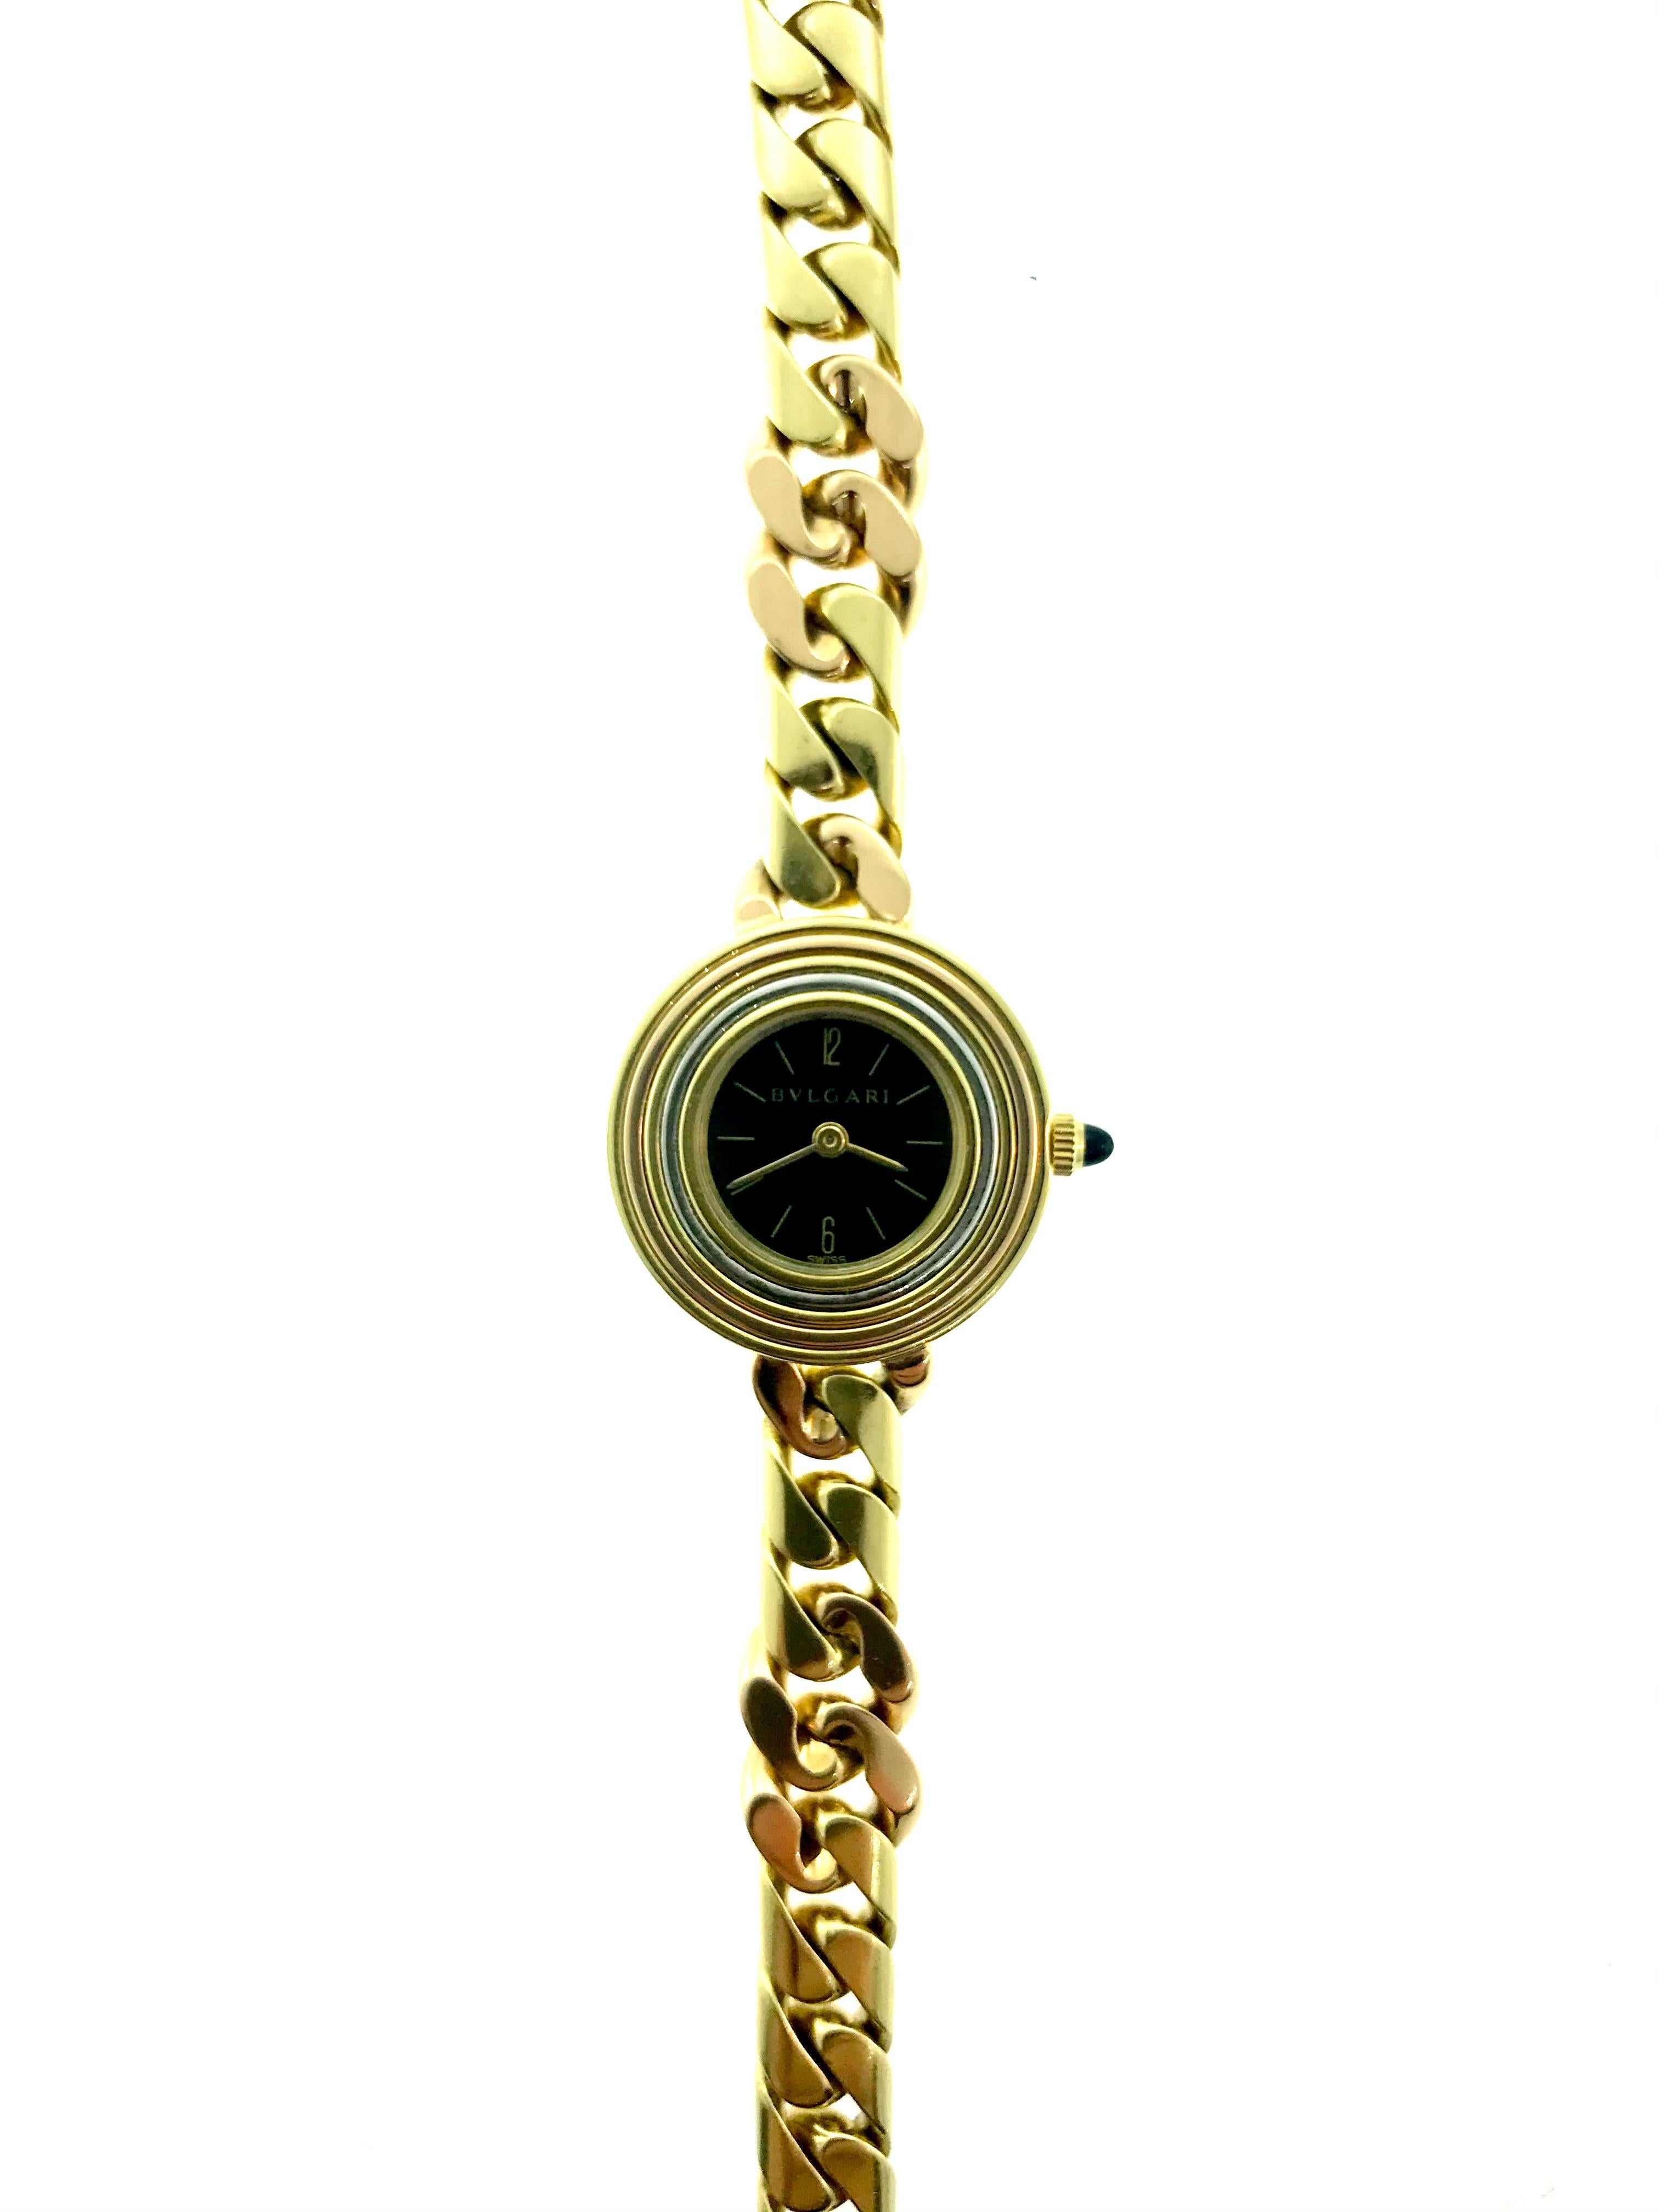 Exquisite tri-color 18k gold watch by Bulgari from Piccola Catene (